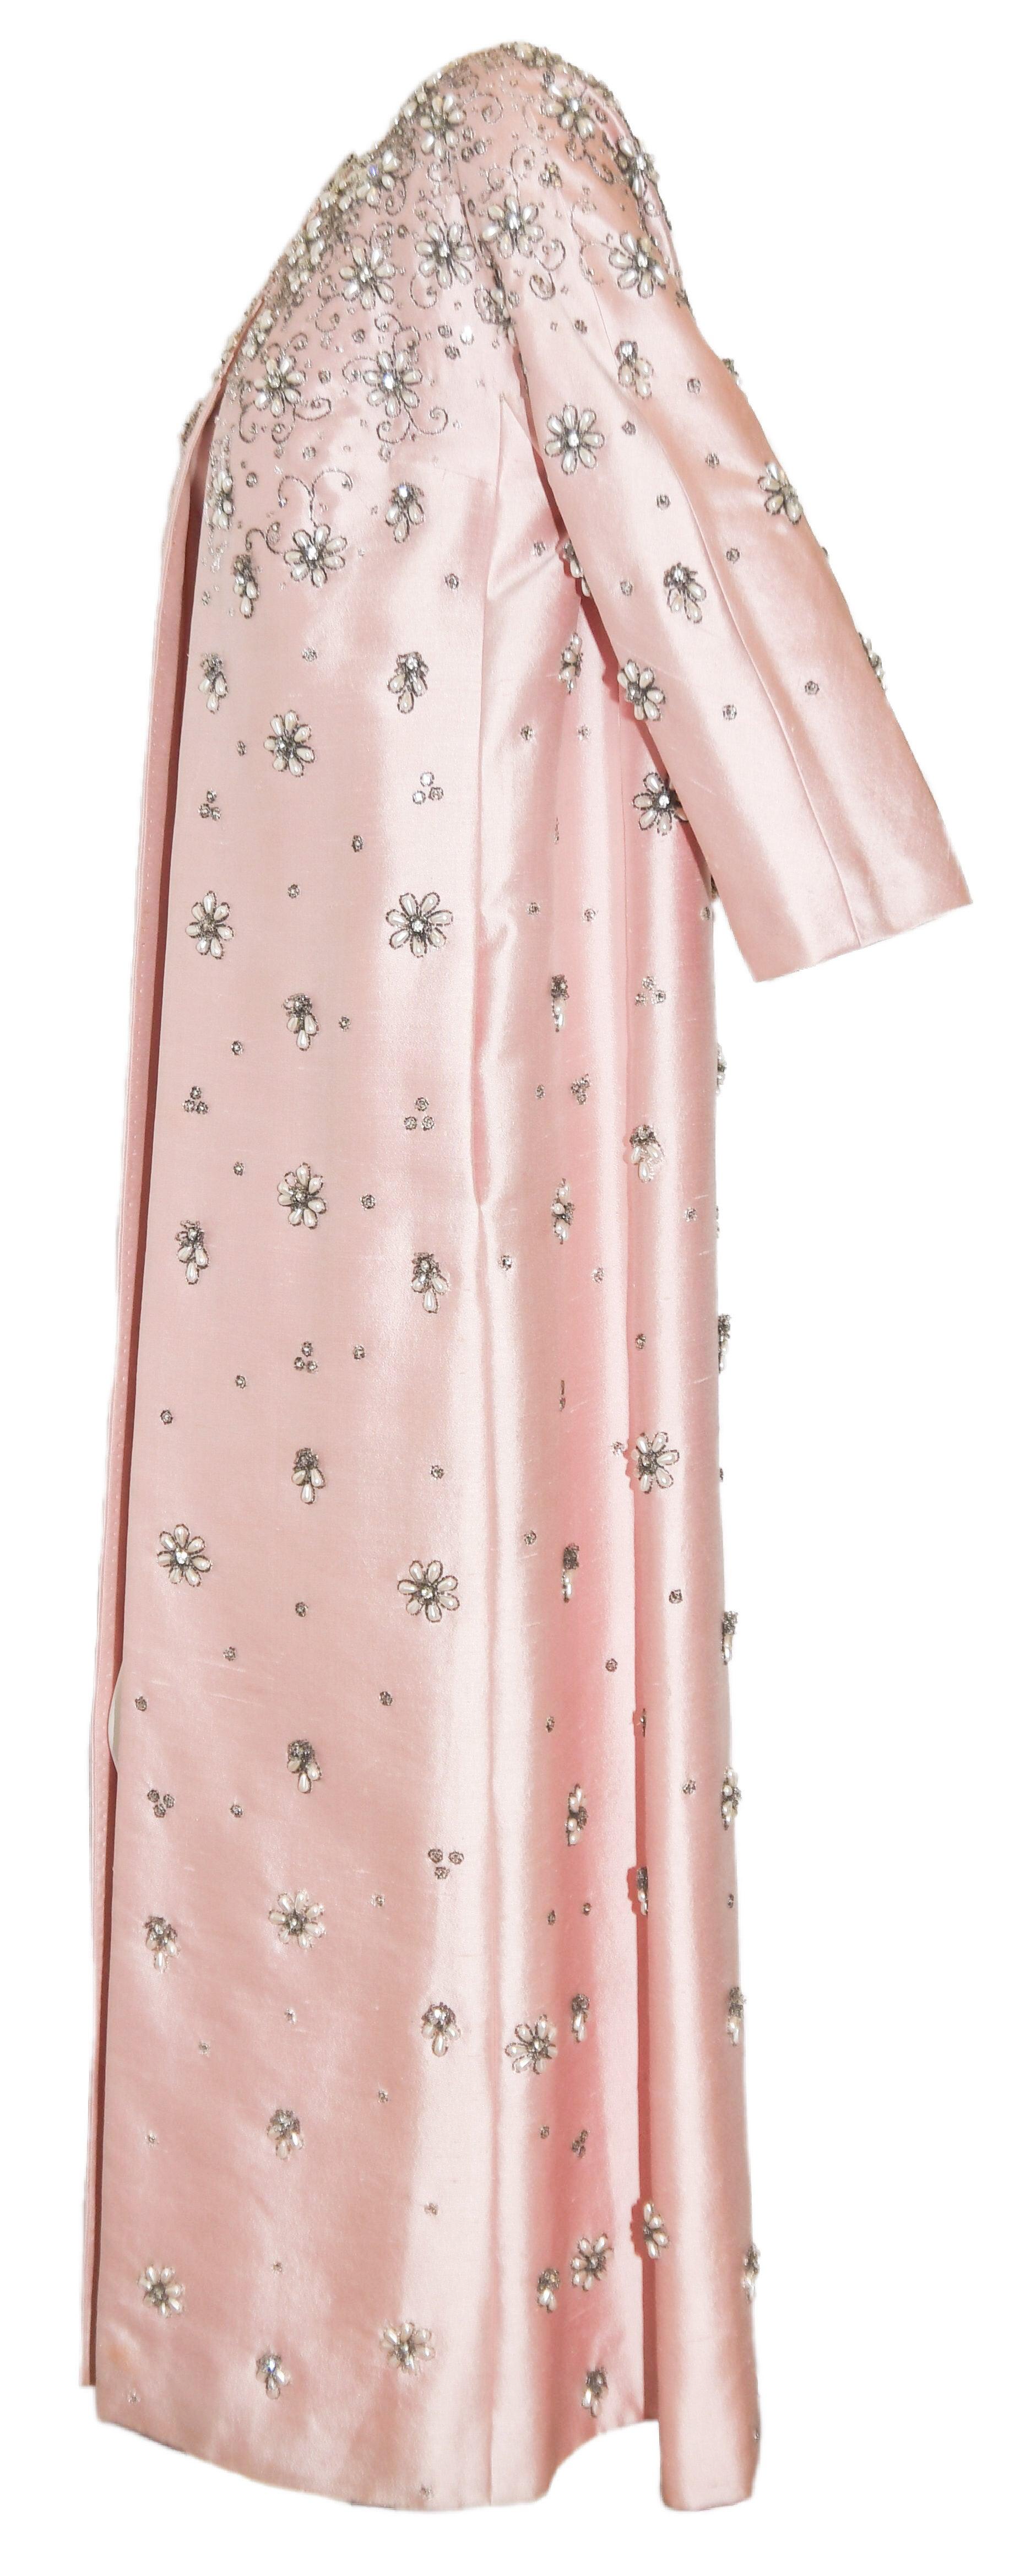 Sara Fredericks vintage from the 1960's is heavily beaded with faux teardrop pearls, tube beads and iridescent crystals and sequins.  This pink silk long evening coat is covered in Daisy like flowers, commencing from the round neckline cascading